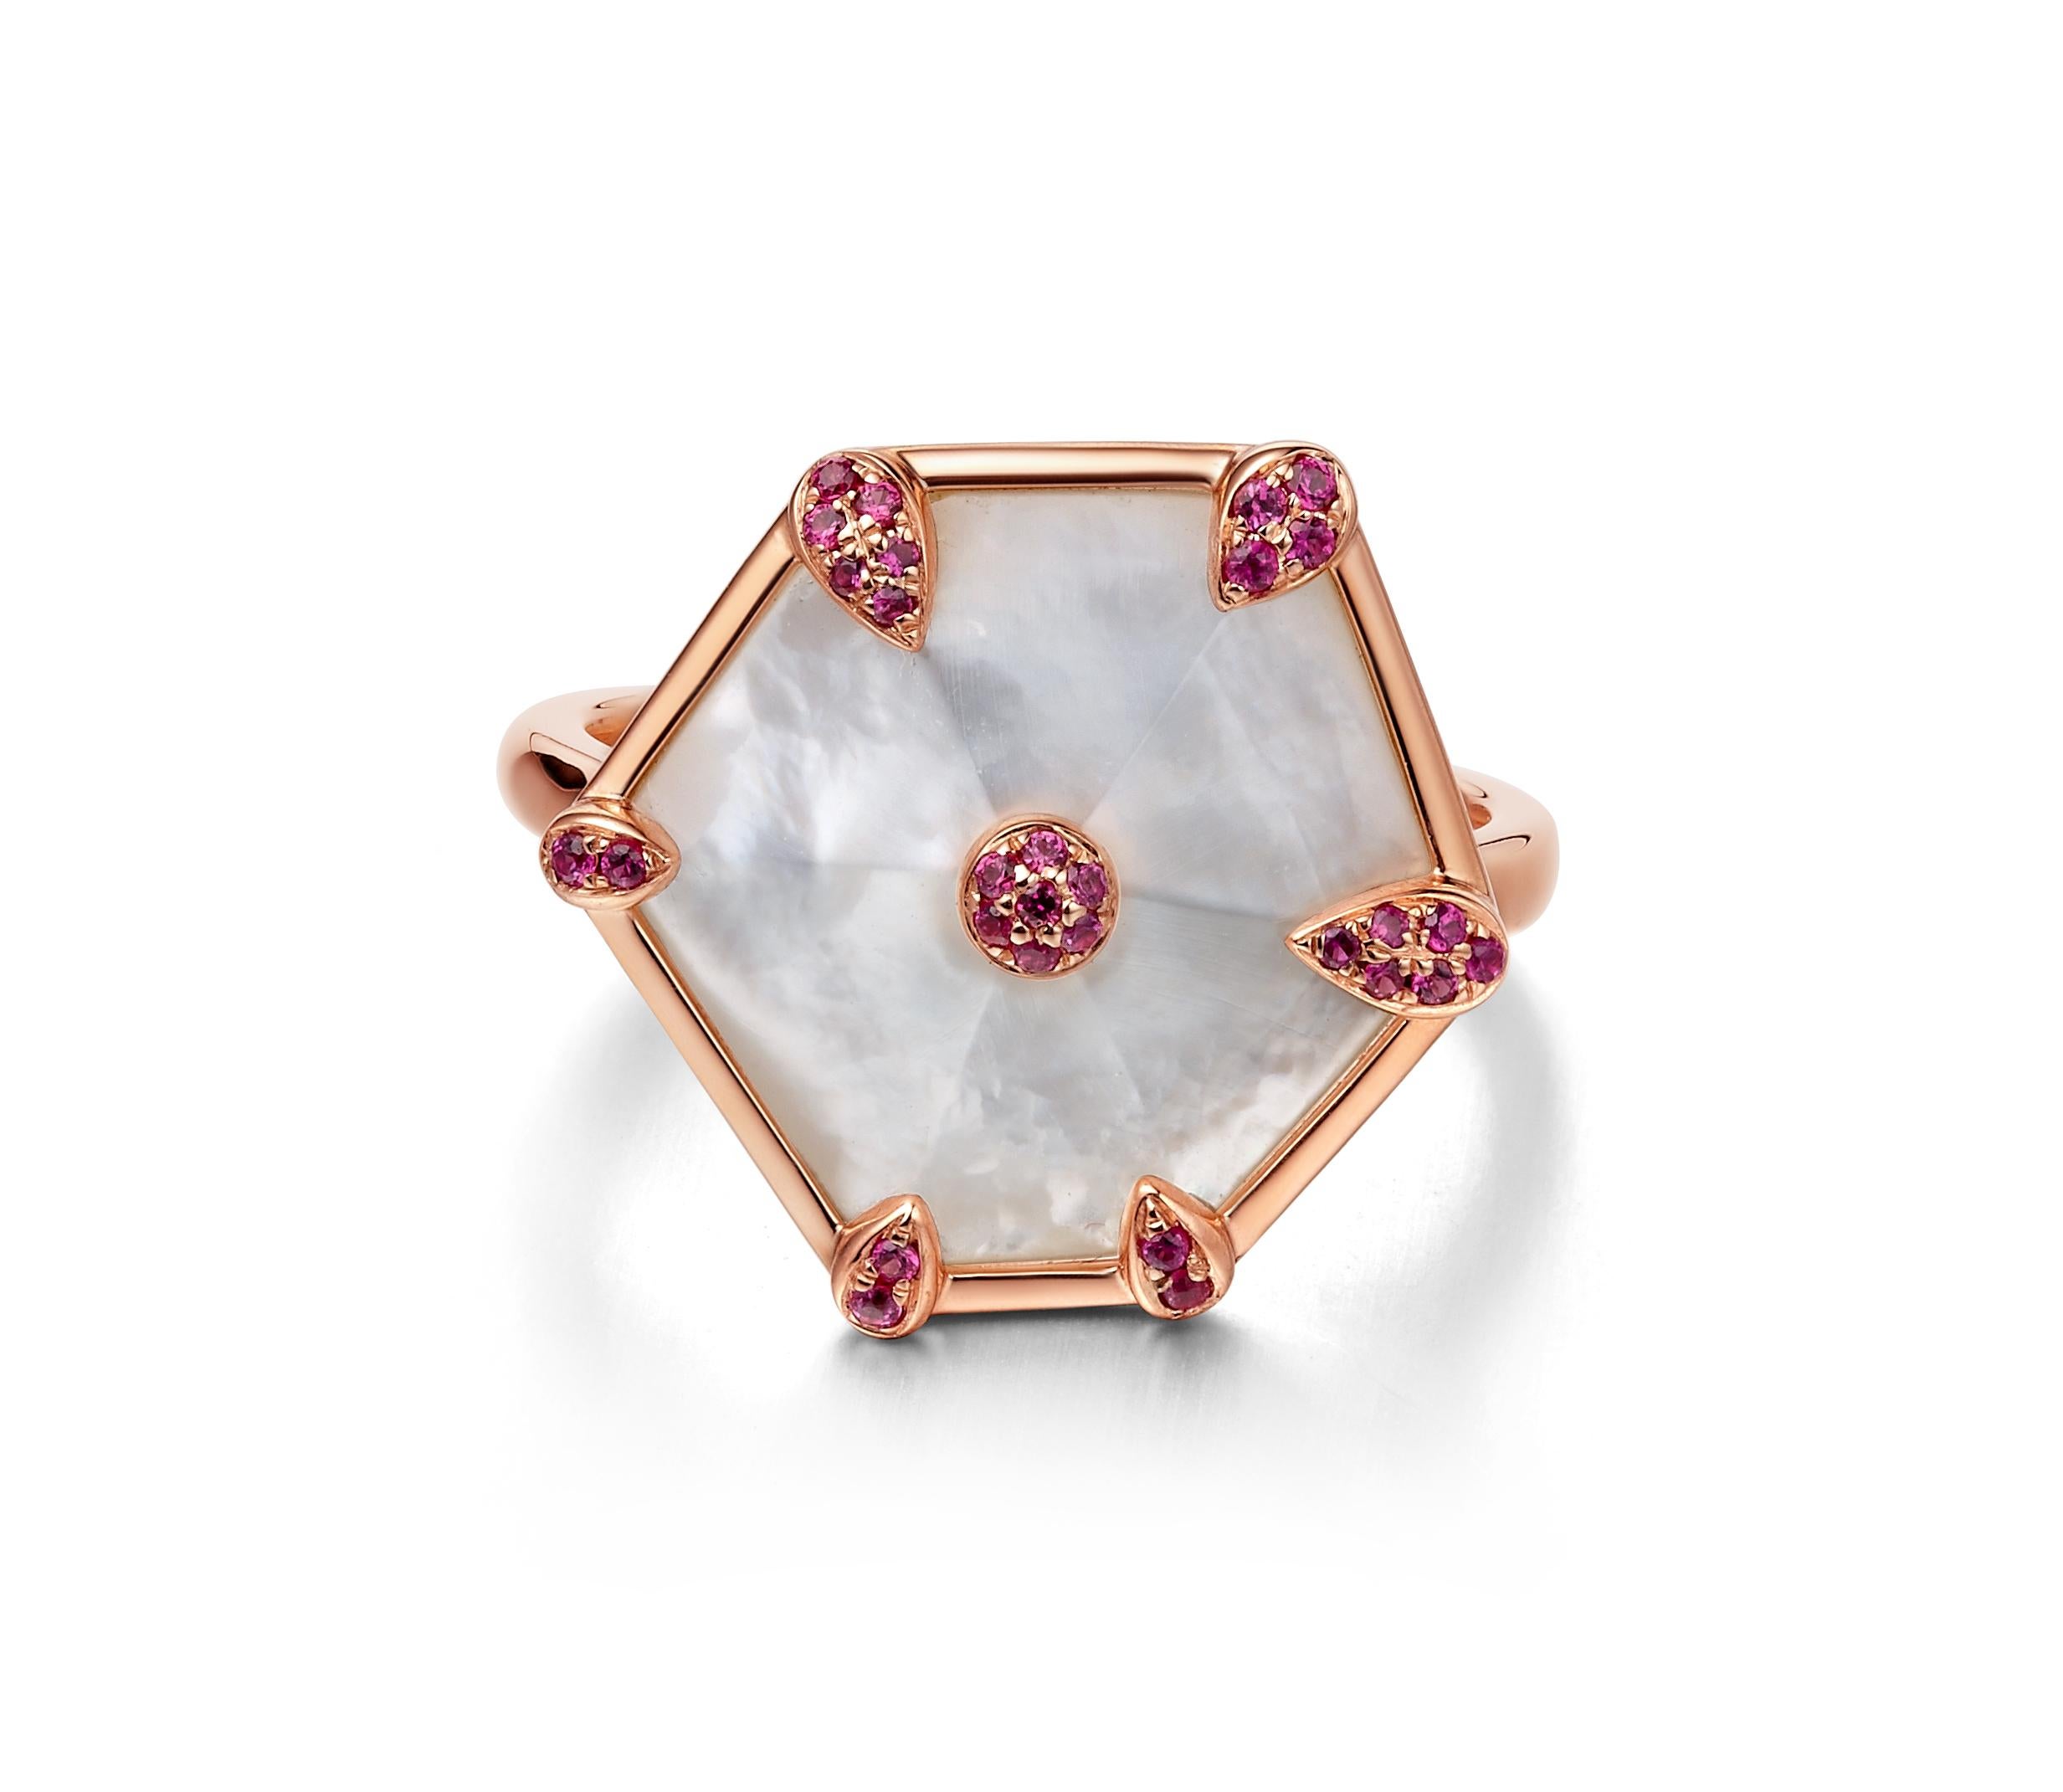 Description:
Nova hexagon ring with 0.086ct pink sapphires and 3.5ct mother of pearl, set in 18ct rose gold with a high polish.

Inspiration
The Nova Collection embodies the essence of freedom and having the courage to explore new adventures – much